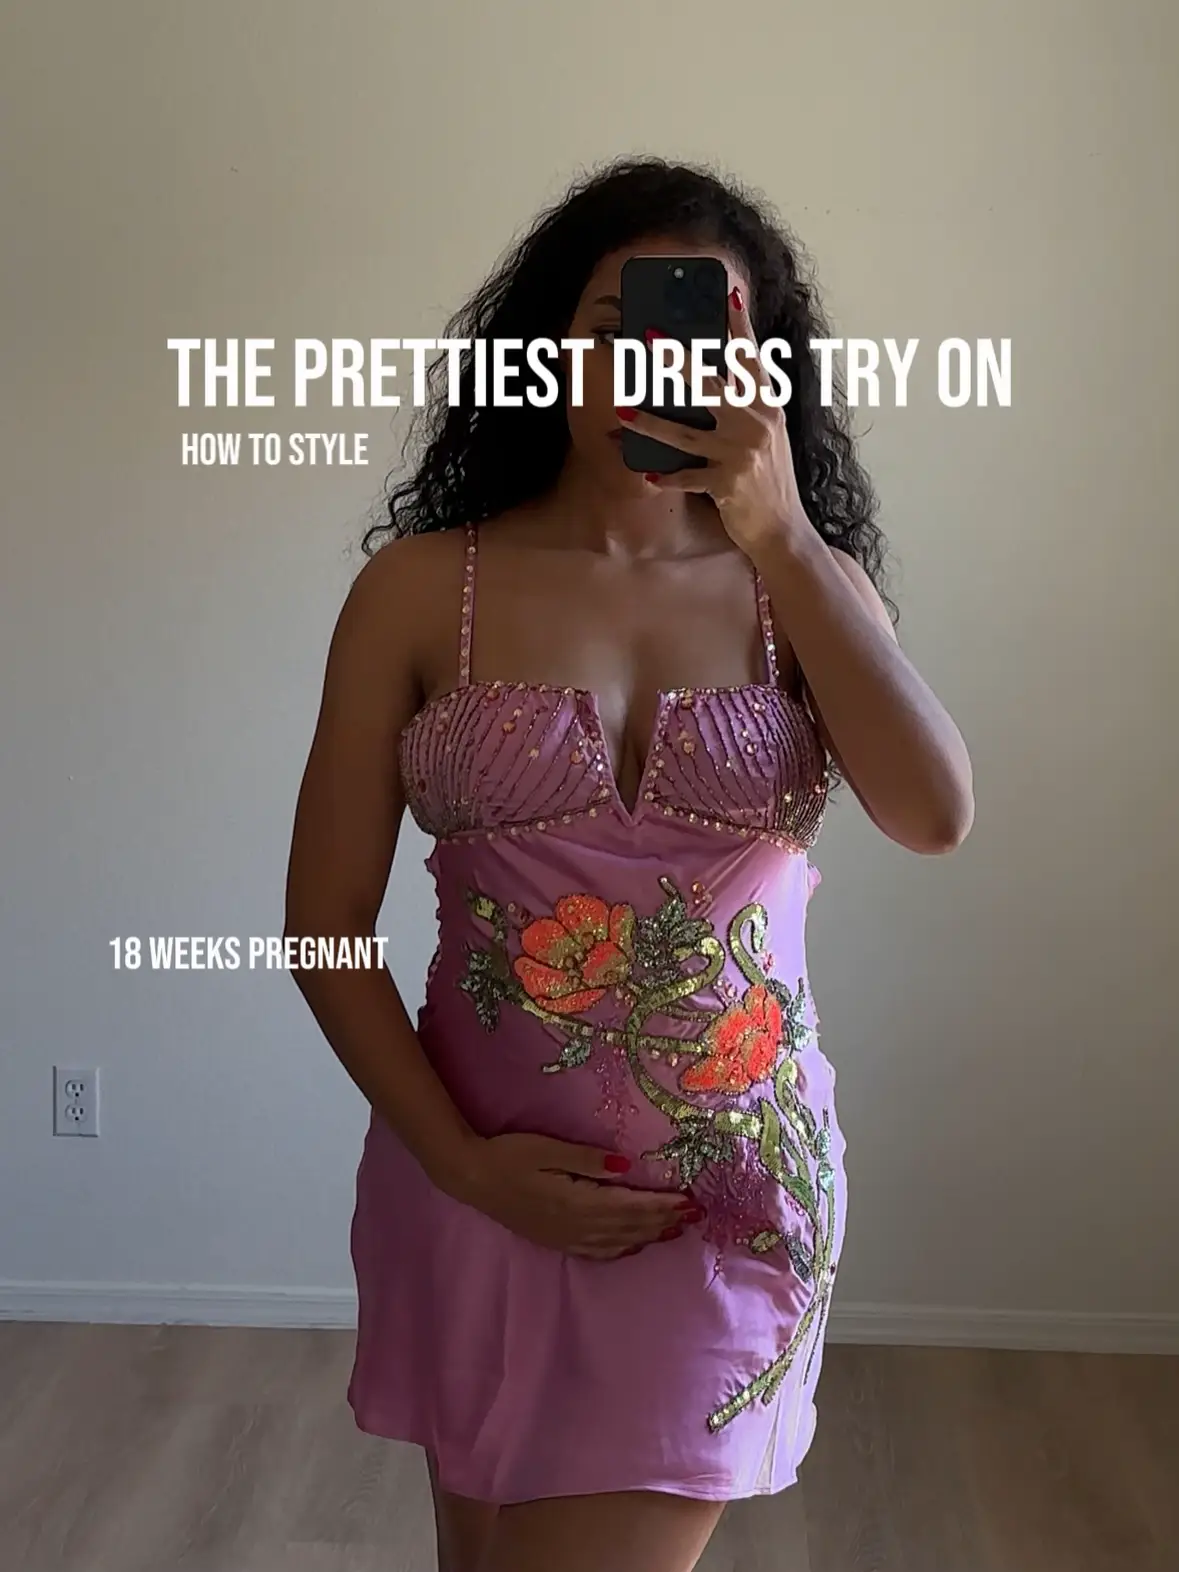 OUTFIT OF THE DAY (15 WEEKS PREGNANT), Gallery posted by Devon Lassiter